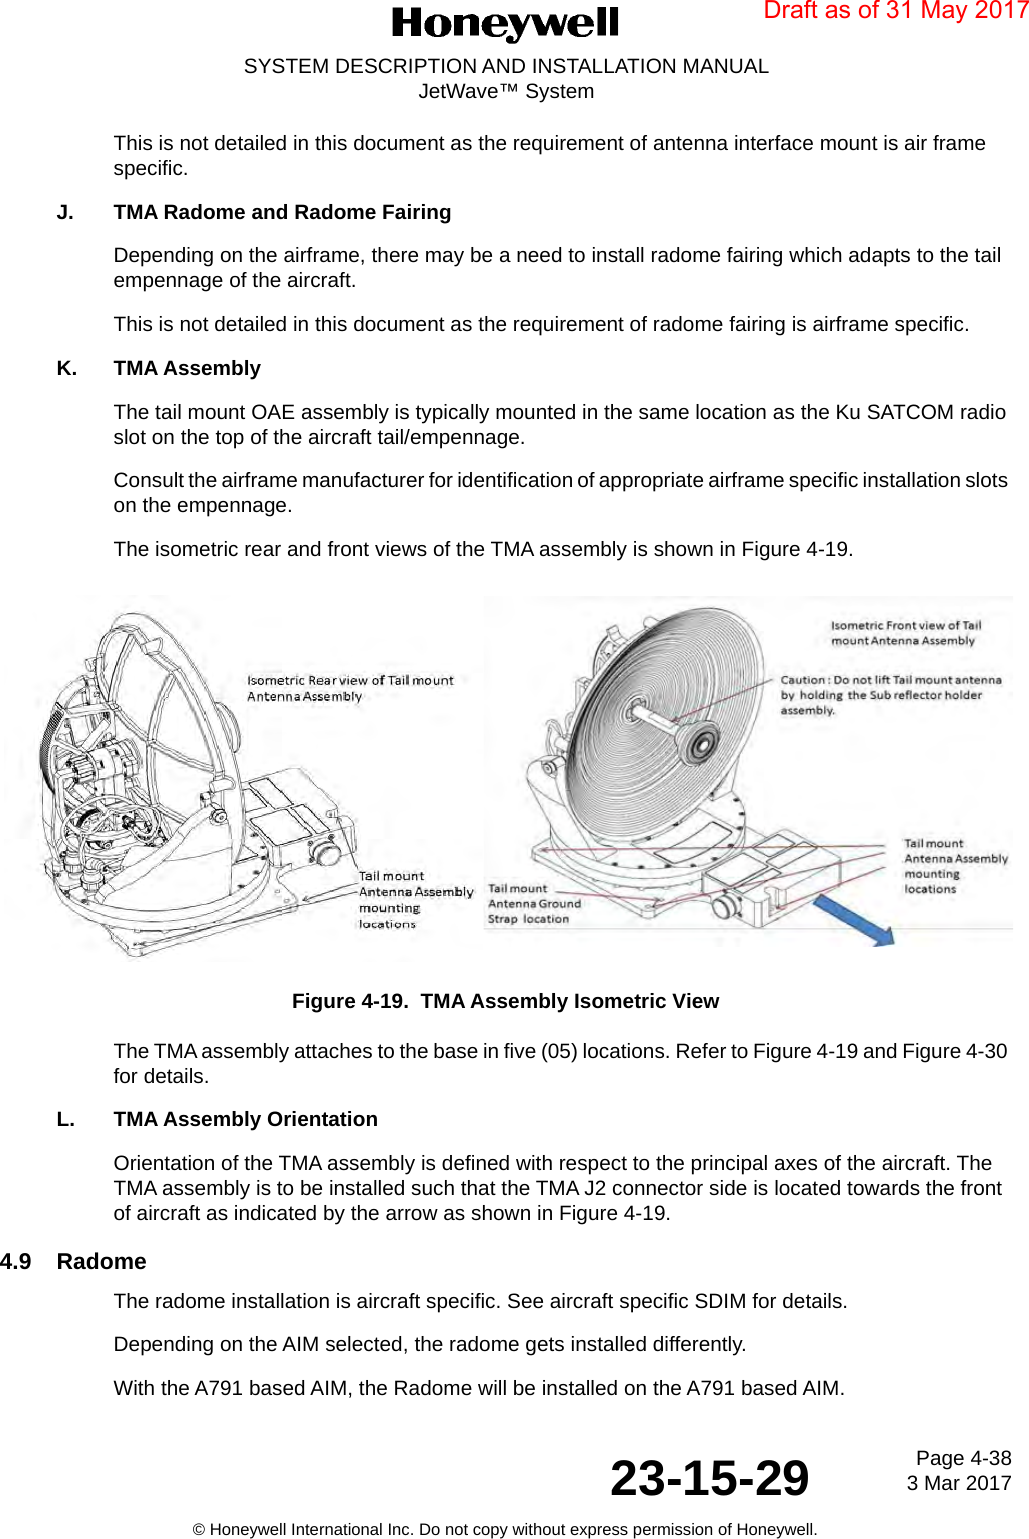 Page 4-38 3 Mar 201723-15-29SYSTEM DESCRIPTION AND INSTALLATION MANUALJetWave™ System© Honeywell International Inc. Do not copy without express permission of Honeywell.This is not detailed in this document as the requirement of antenna interface mount is air frame specific.J. TMA Radome and Radome FairingDepending on the airframe, there may be a need to install radome fairing which adapts to the tail empennage of the aircraft. This is not detailed in this document as the requirement of radome fairing is airframe specific. K. TMA AssemblyThe tail mount OAE assembly is typically mounted in the same location as the Ku SATCOM radio slot on the top of the aircraft tail/empennage. Consult the airframe manufacturer for identification of appropriate airframe specific installation slots on the empennage. The isometric rear and front views of the TMA assembly is shown in Figure 4-19. Figure 4-19.  TMA Assembly Isometric ViewThe TMA assembly attaches to the base in five (05) locations. Refer to Figure 4-19 and Figure 4-30 for details.L. TMA Assembly OrientationOrientation of the TMA assembly is defined with respect to the principal axes of the aircraft. The TMA assembly is to be installed such that the TMA J2 connector side is located towards the front of aircraft as indicated by the arrow as shown in Figure 4-19. 4.9 RadomeThe radome installation is aircraft specific. See aircraft specific SDIM for details. Depending on the AIM selected, the radome gets installed differently. With the A791 based AIM, the Radome will be installed on the A791 based AIM.Draft as of 31 May 2017